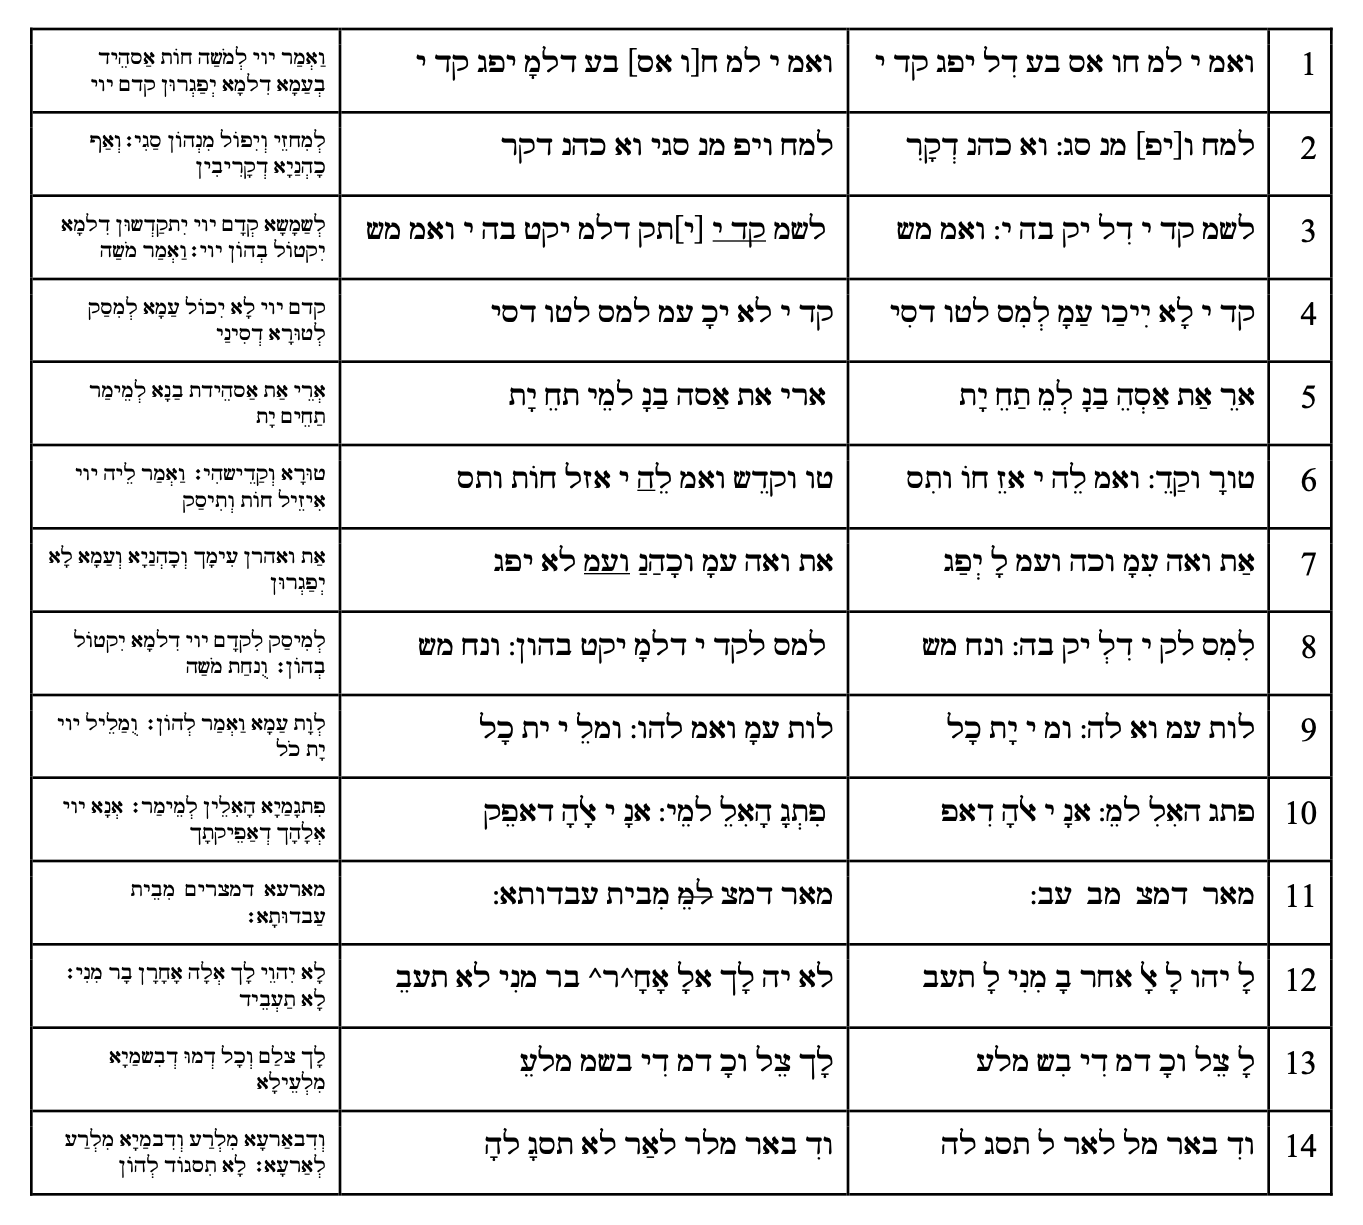 Table with transcription